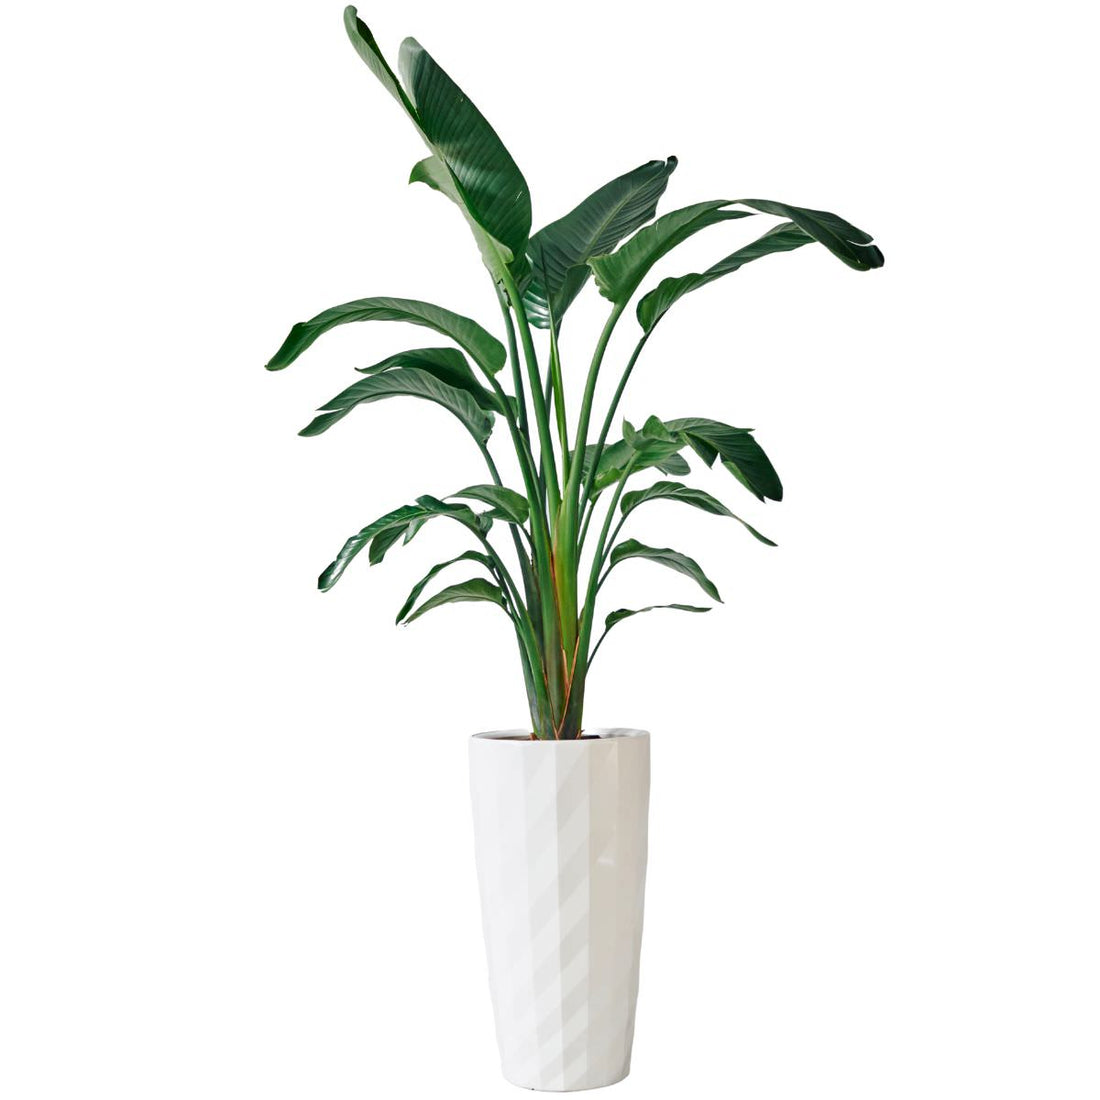 XL Bird of Paradise Plant Potted In Lechuza Diamante Planter - White - My City Plants